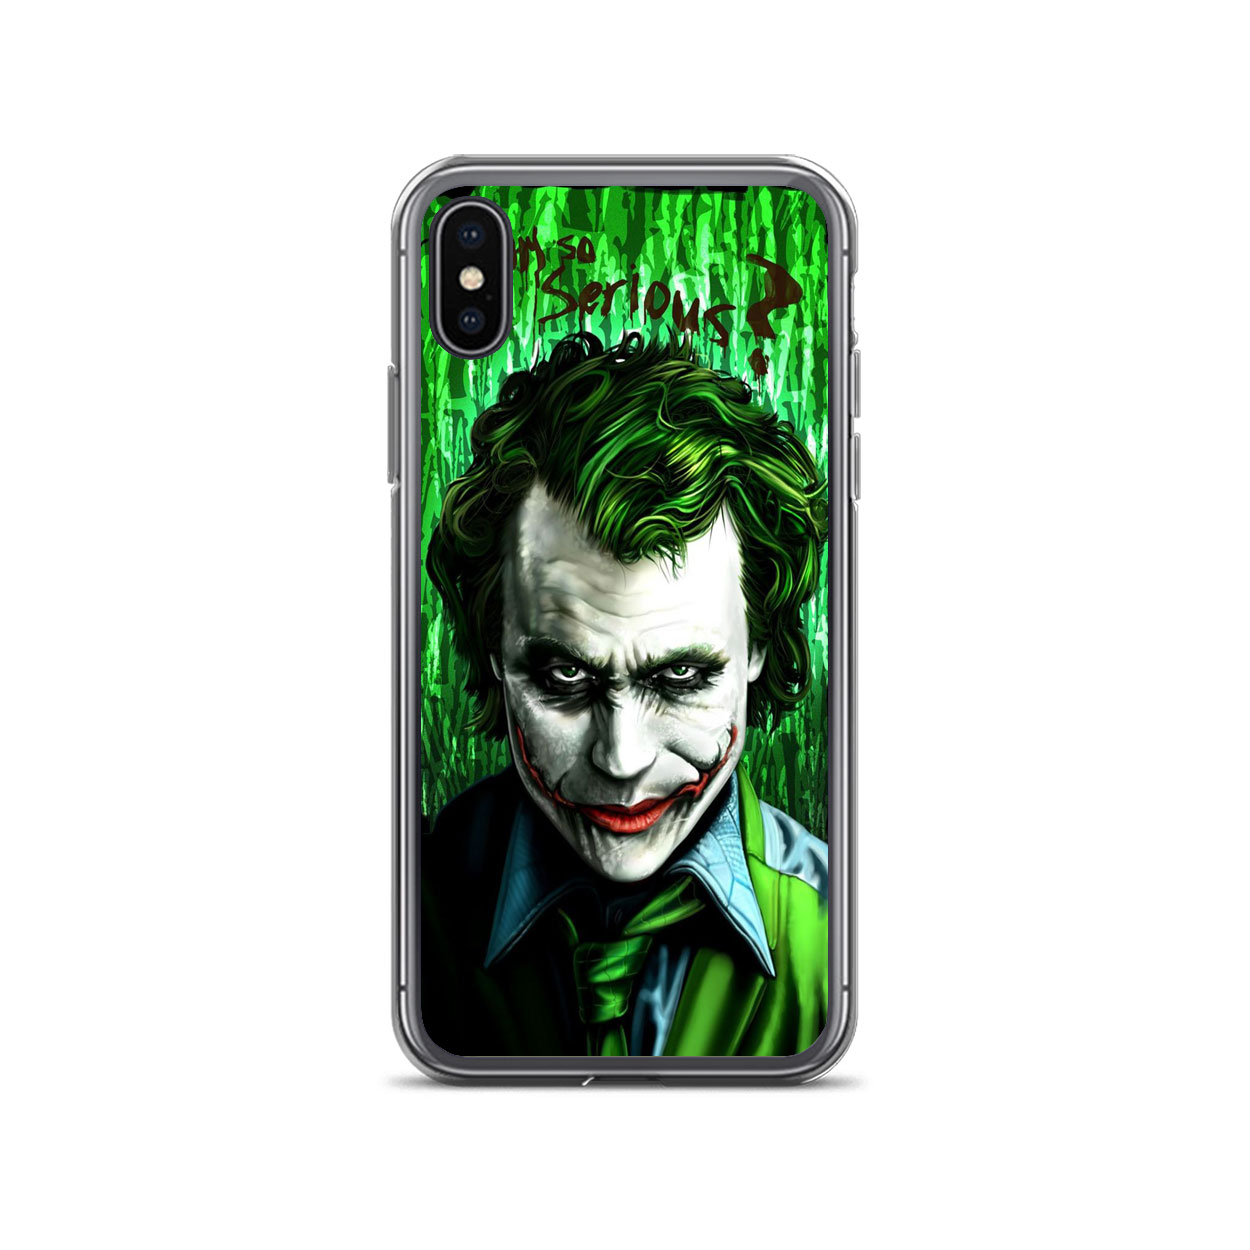 Joker Why So Serious Green iPhone Case for XS/XS Max,XR,X,8/8 Plus,7 ...